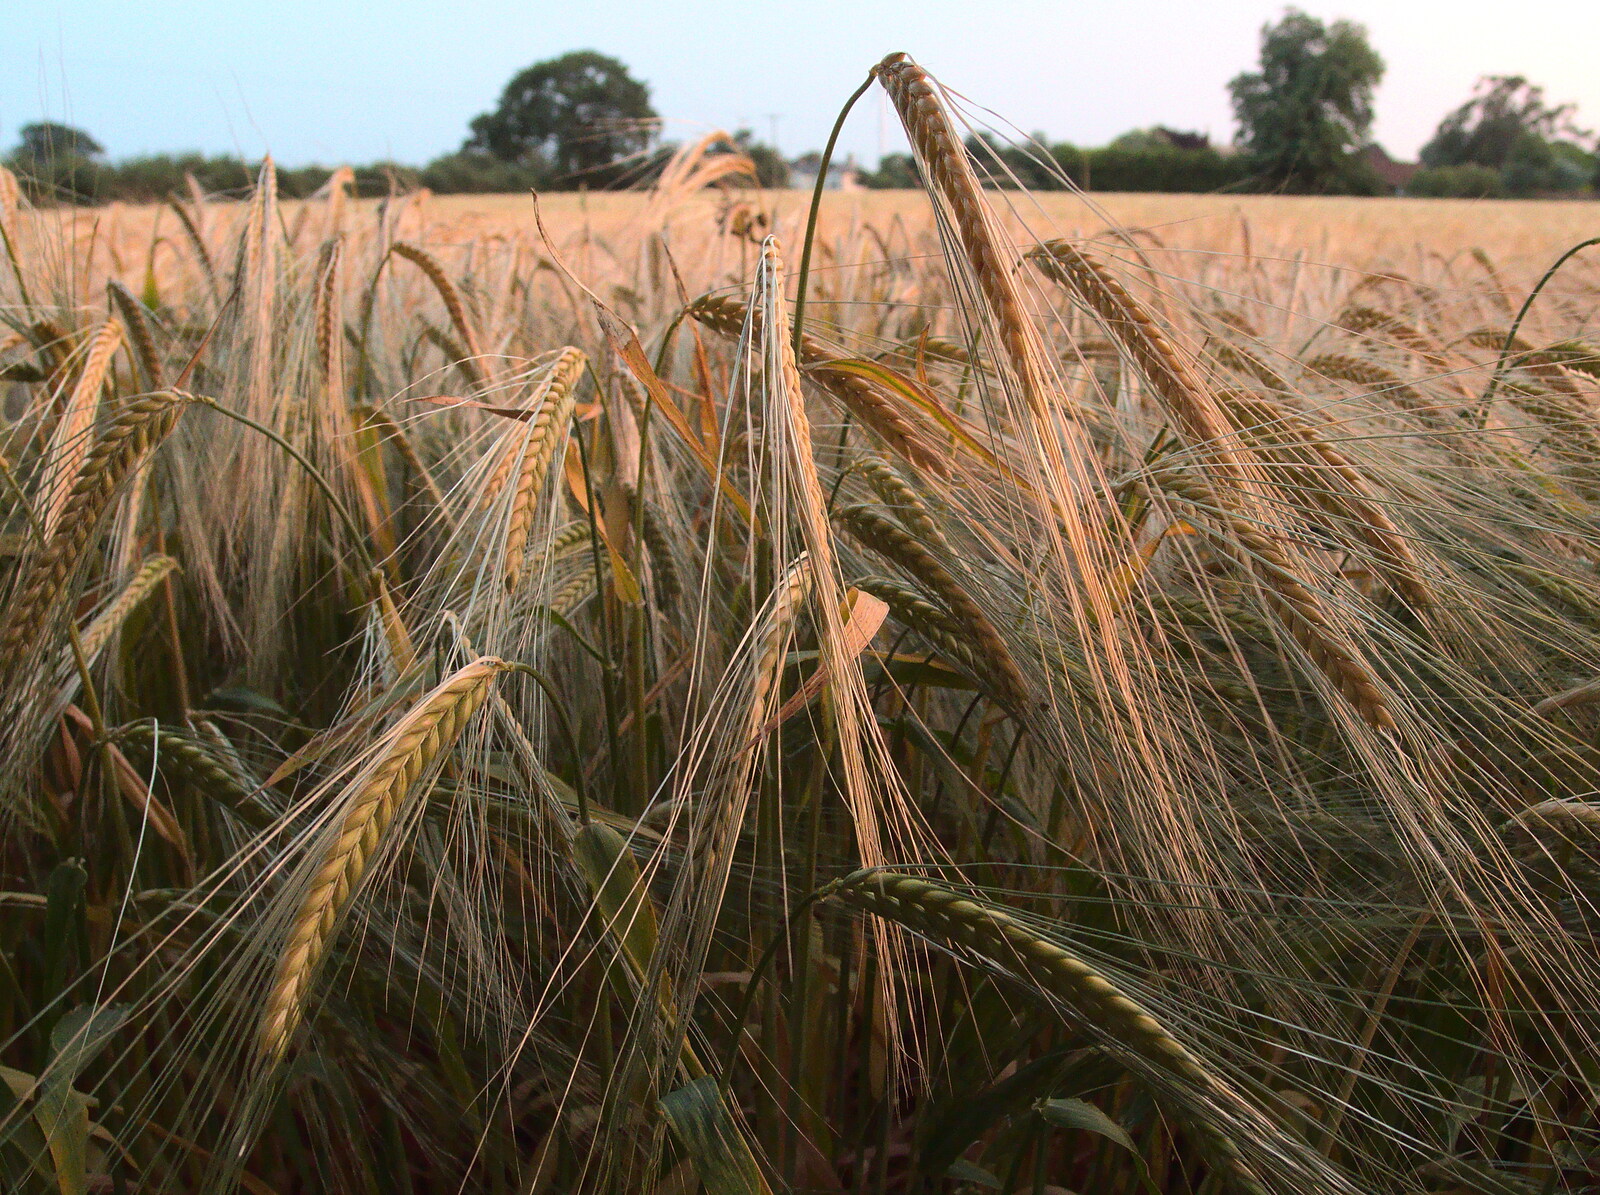 Barley in the sunset from The Demolition of the Garage, Brome, Suffolk - 17th July 2013